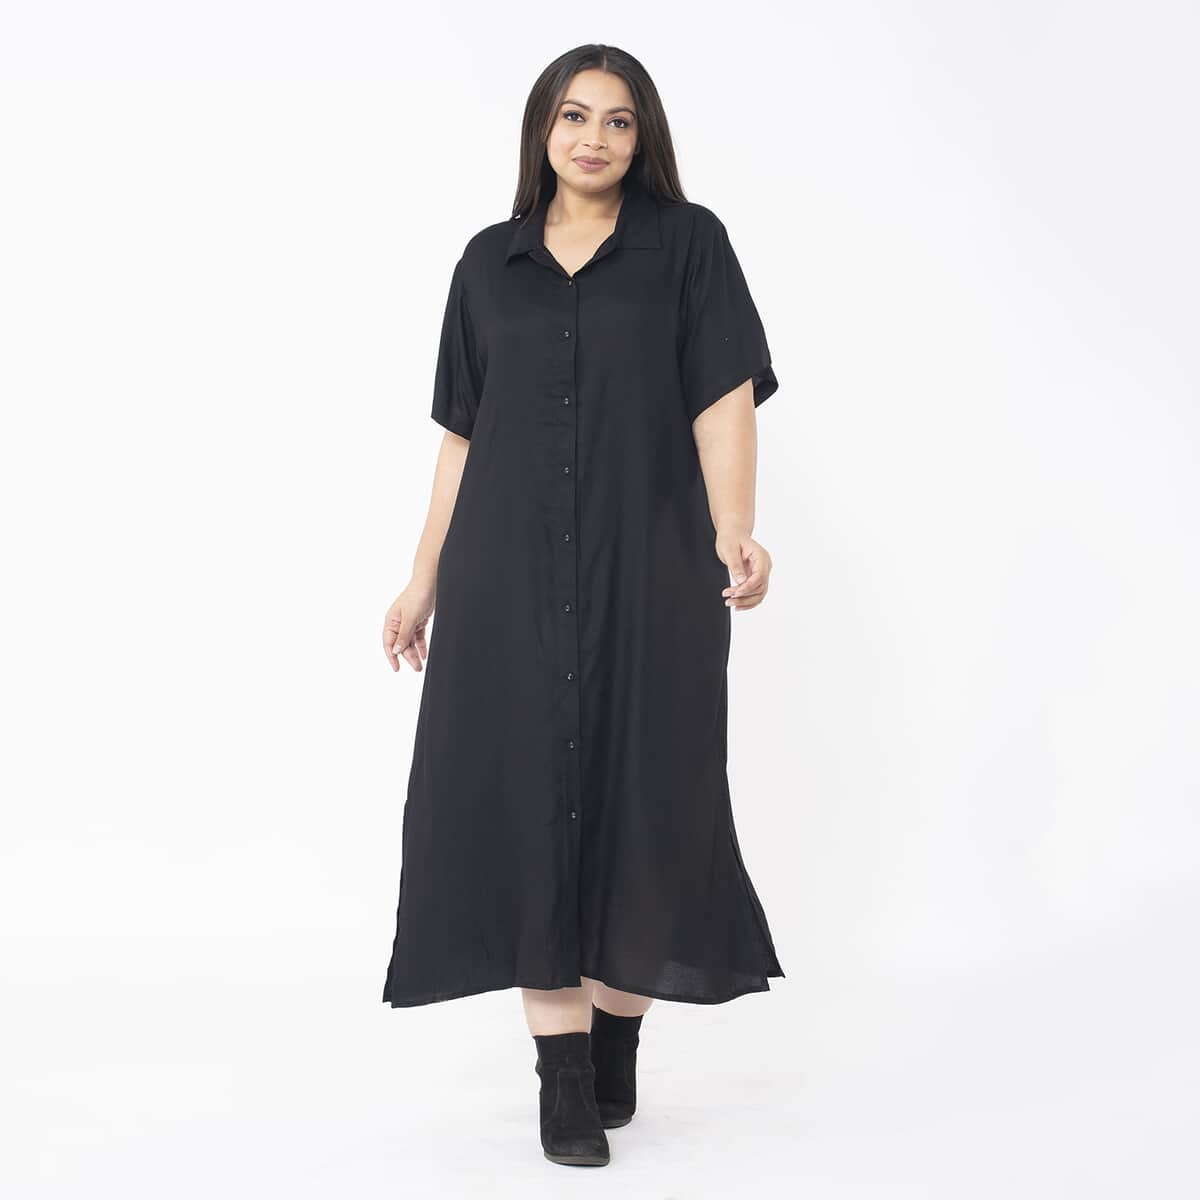 Tamsy Black Collar Dress with 3/4 Sleeve -S/M image number 3